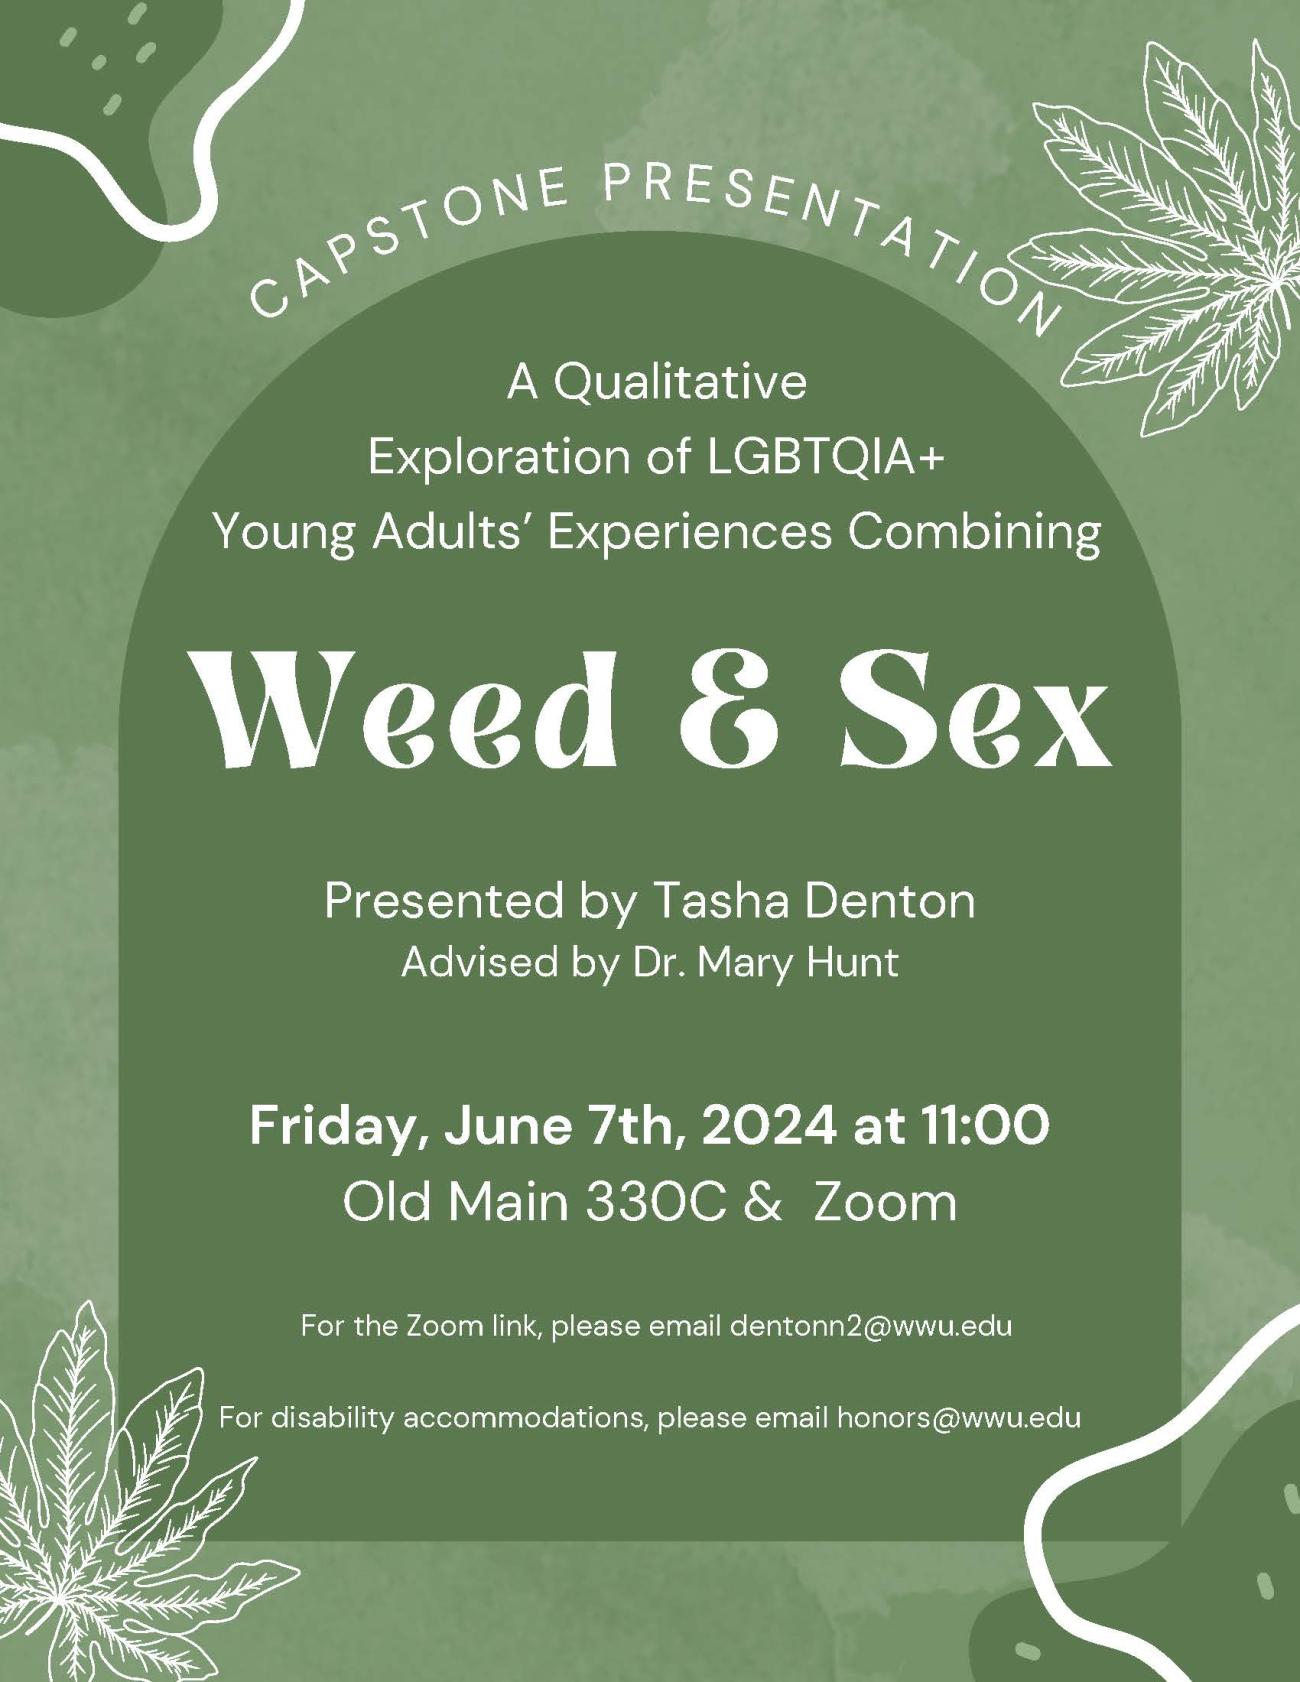 Arched text at the top says: "Capstone presentation". Within a darker green arch, it says "A Qualitative Exploration of LGBTQIA+ Young Adults' Experiences Combining" The center of the poster in a larger size and less formal, bolded font says "Weed & Sex" Under that, "Presented by Tasha Denton Advised by Dr. Mary Hunt. Friday, June 7th, 2024 at 11:00, Old Main 330C & Zoom. For the Zoom link, please email dentonn2 @wwu.edu. For disability accommodations, please email honors @wwu.edu"